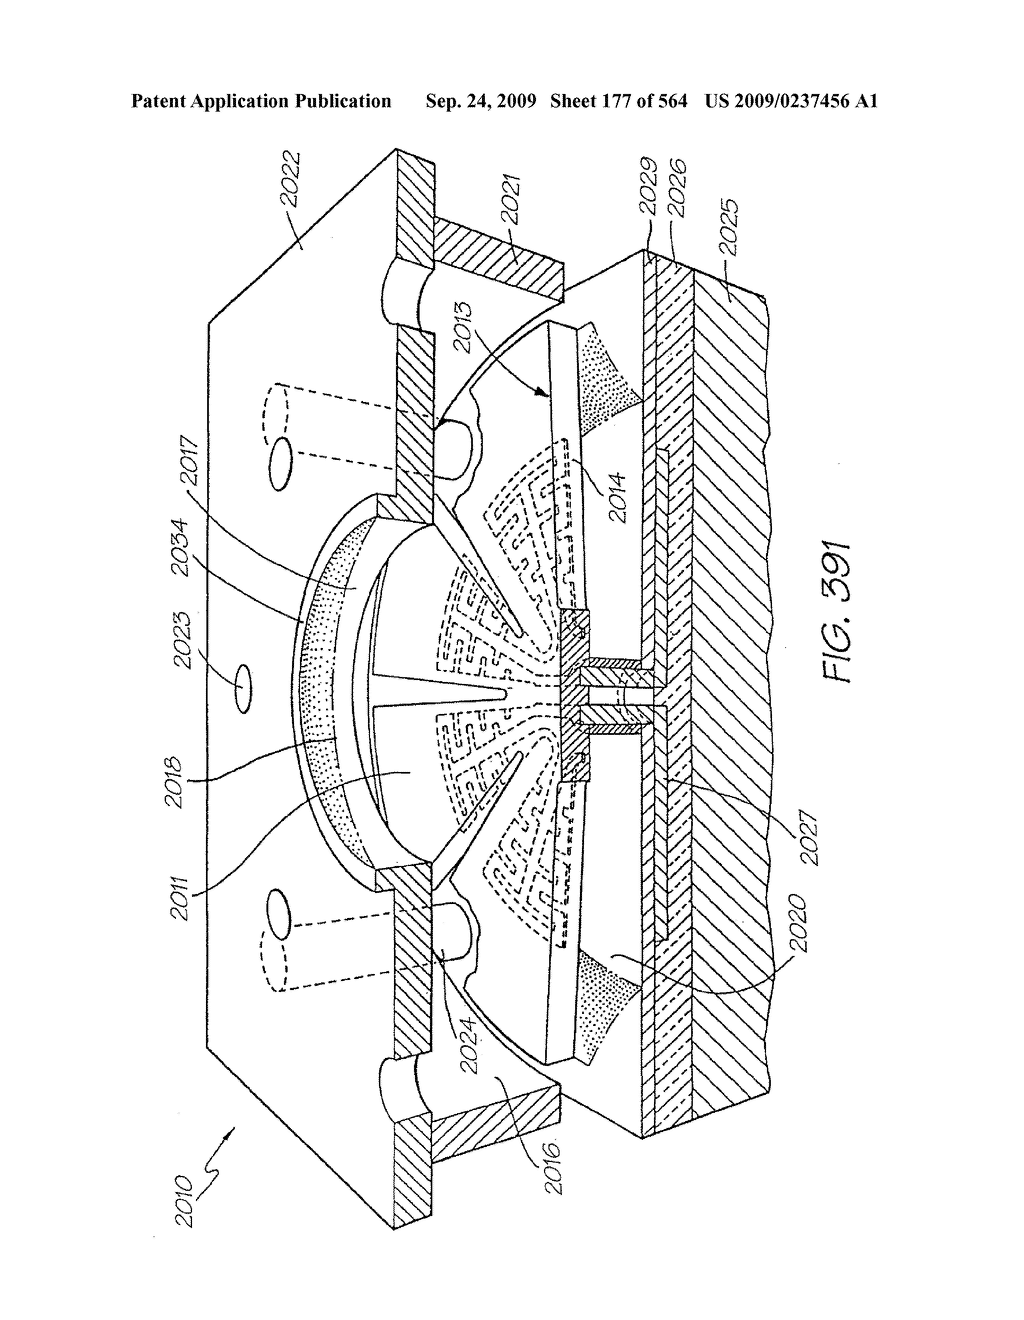 Inkjet Printhead With Paddle For Ejecting Ink From One Of Two Nozzles - diagram, schematic, and image 178